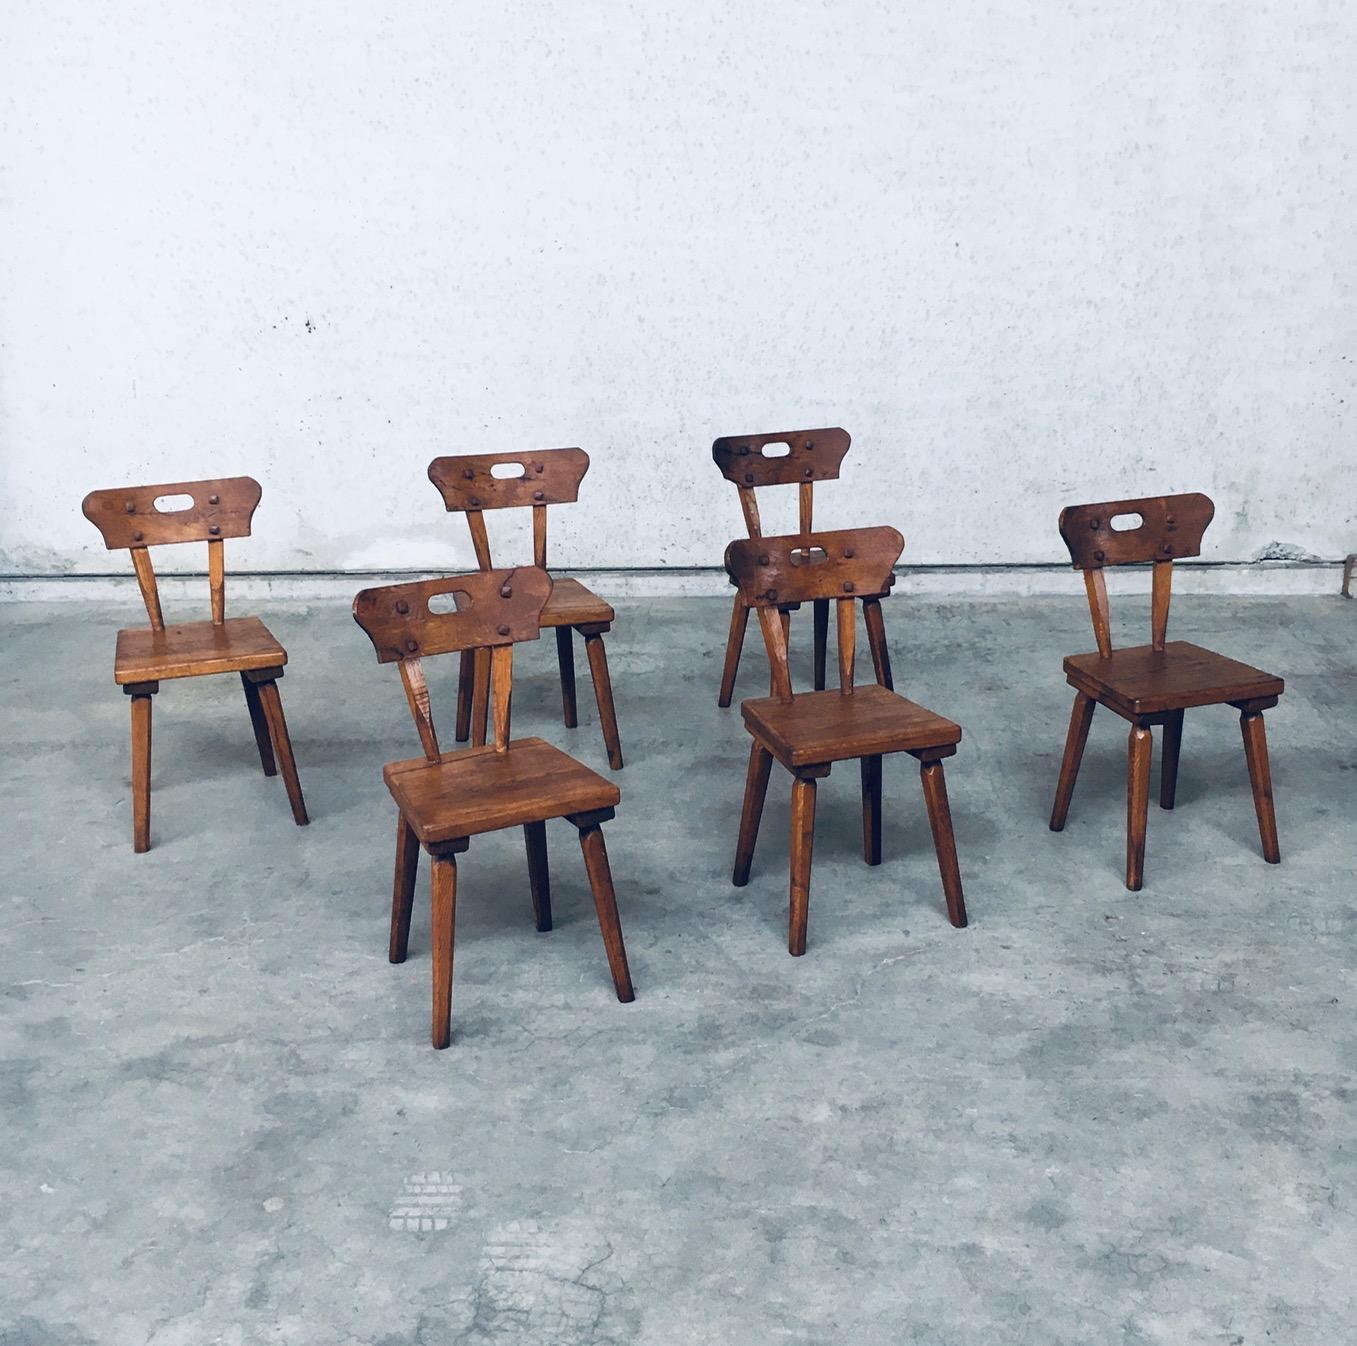 Vintage Handcrafted Folk Art Rustic Oak Dining Chair set of 6. Made in France, 1940s period. Handmade handcrafted and carved solid oak constructed dining chair set. All chairs are in very good condition for their age and use. One chair has some